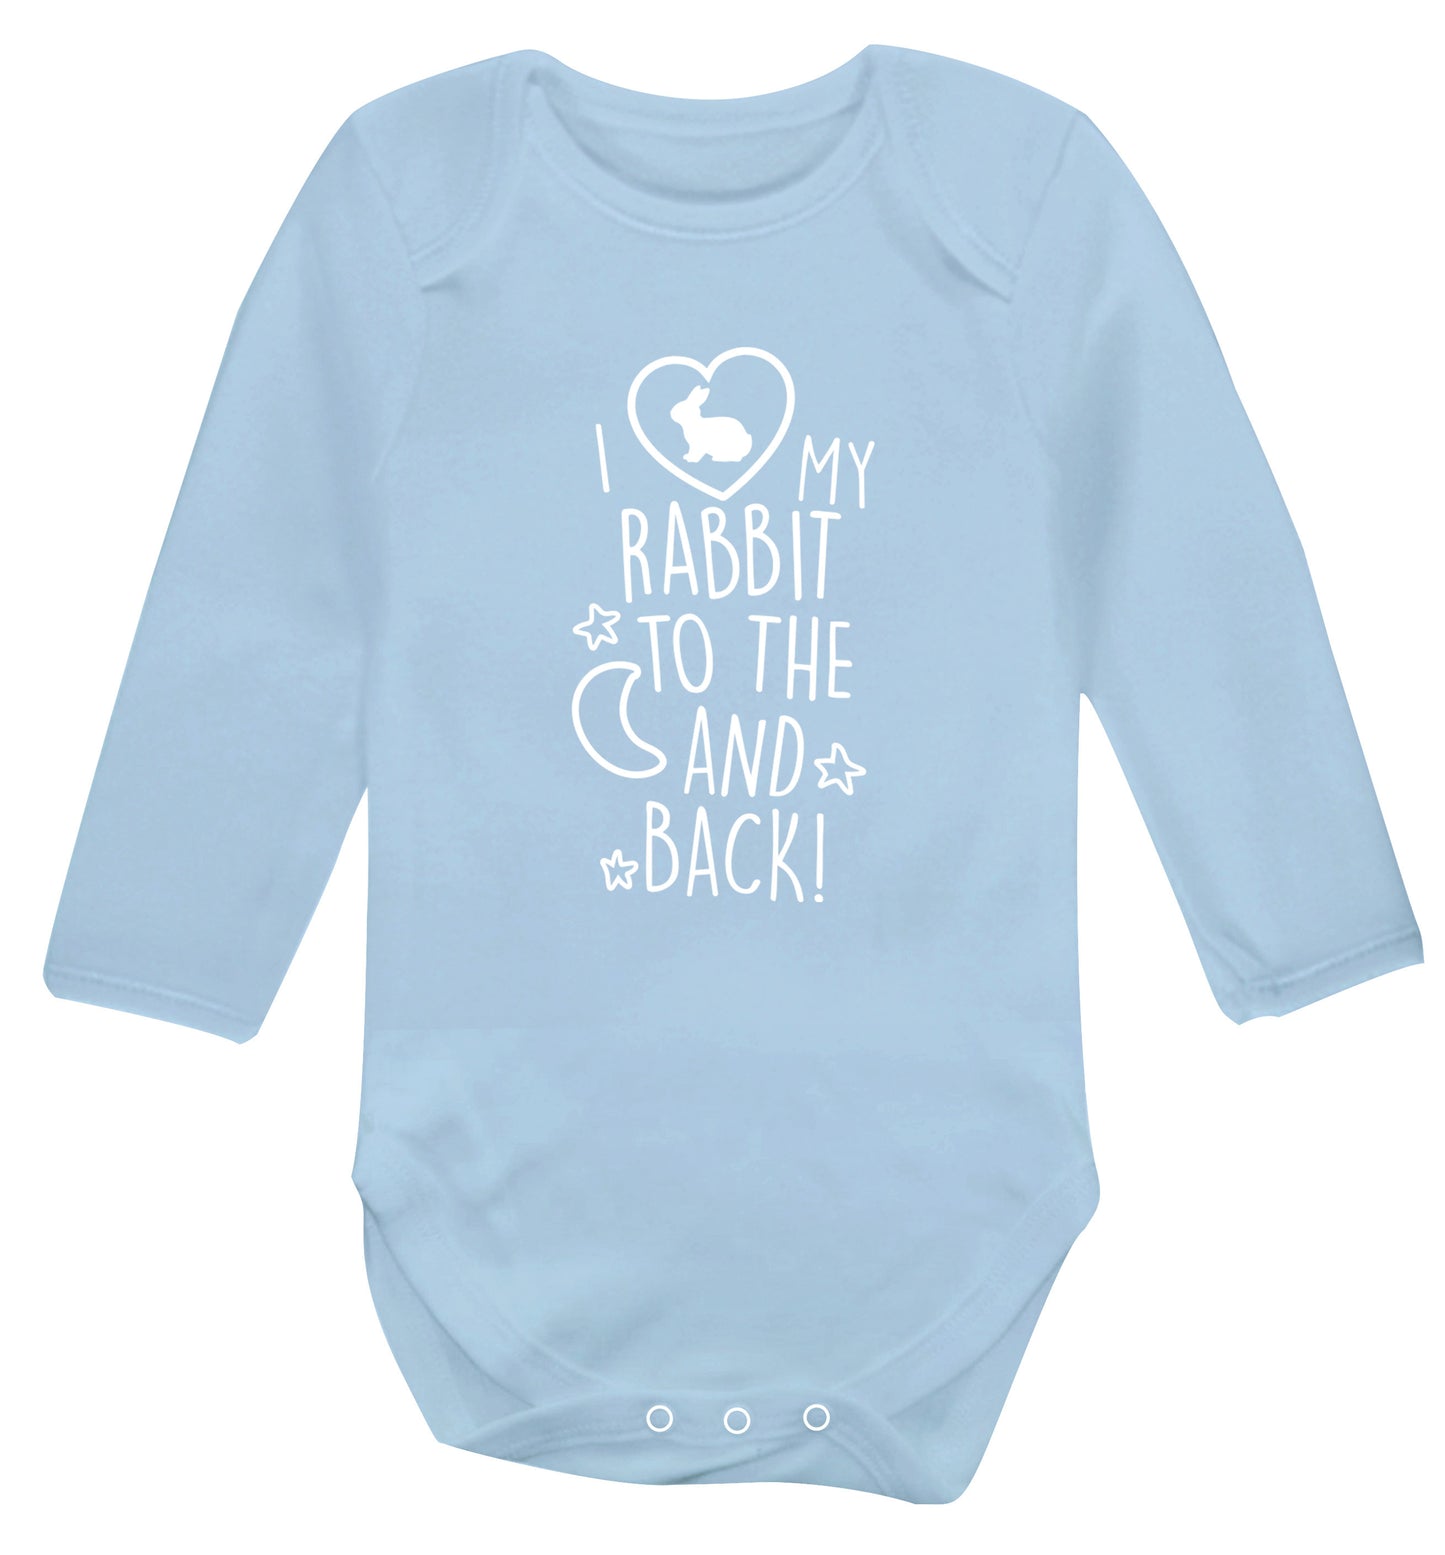 I love my rabbit to the moon and back Baby Vest long sleeved pale blue 6-12 months